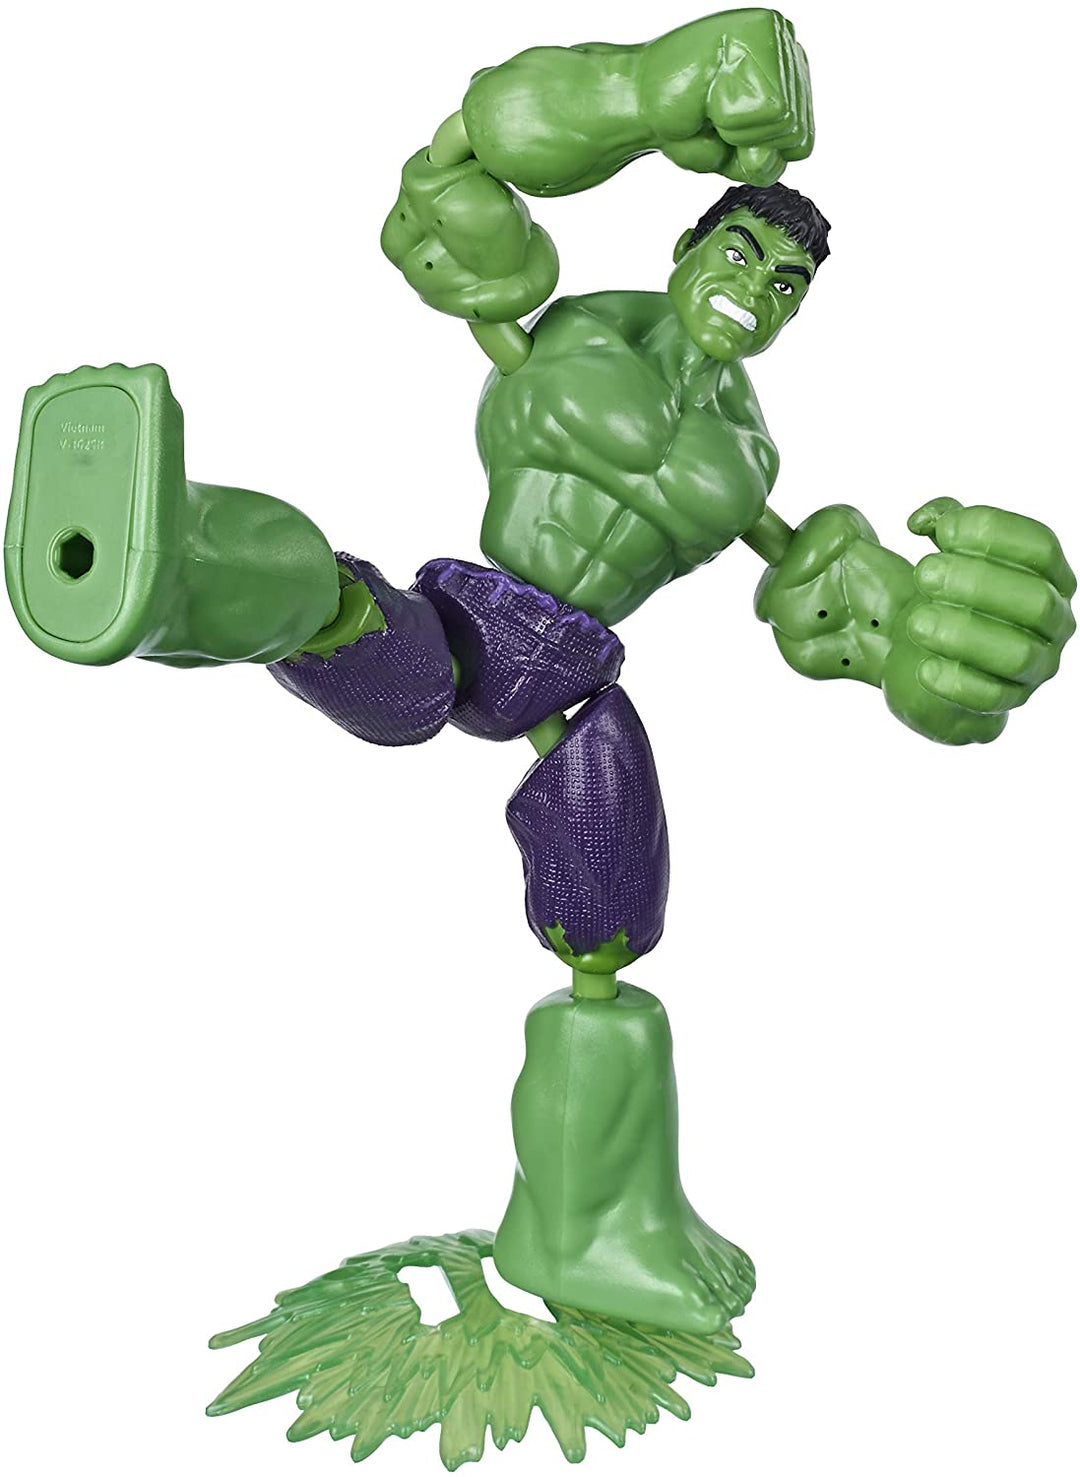 Avengers E7871 Marvel Bend and Flex Action, 6-Inch Flexible Hulk Figure, Includes Blast Accessory, Ages 4 and Up